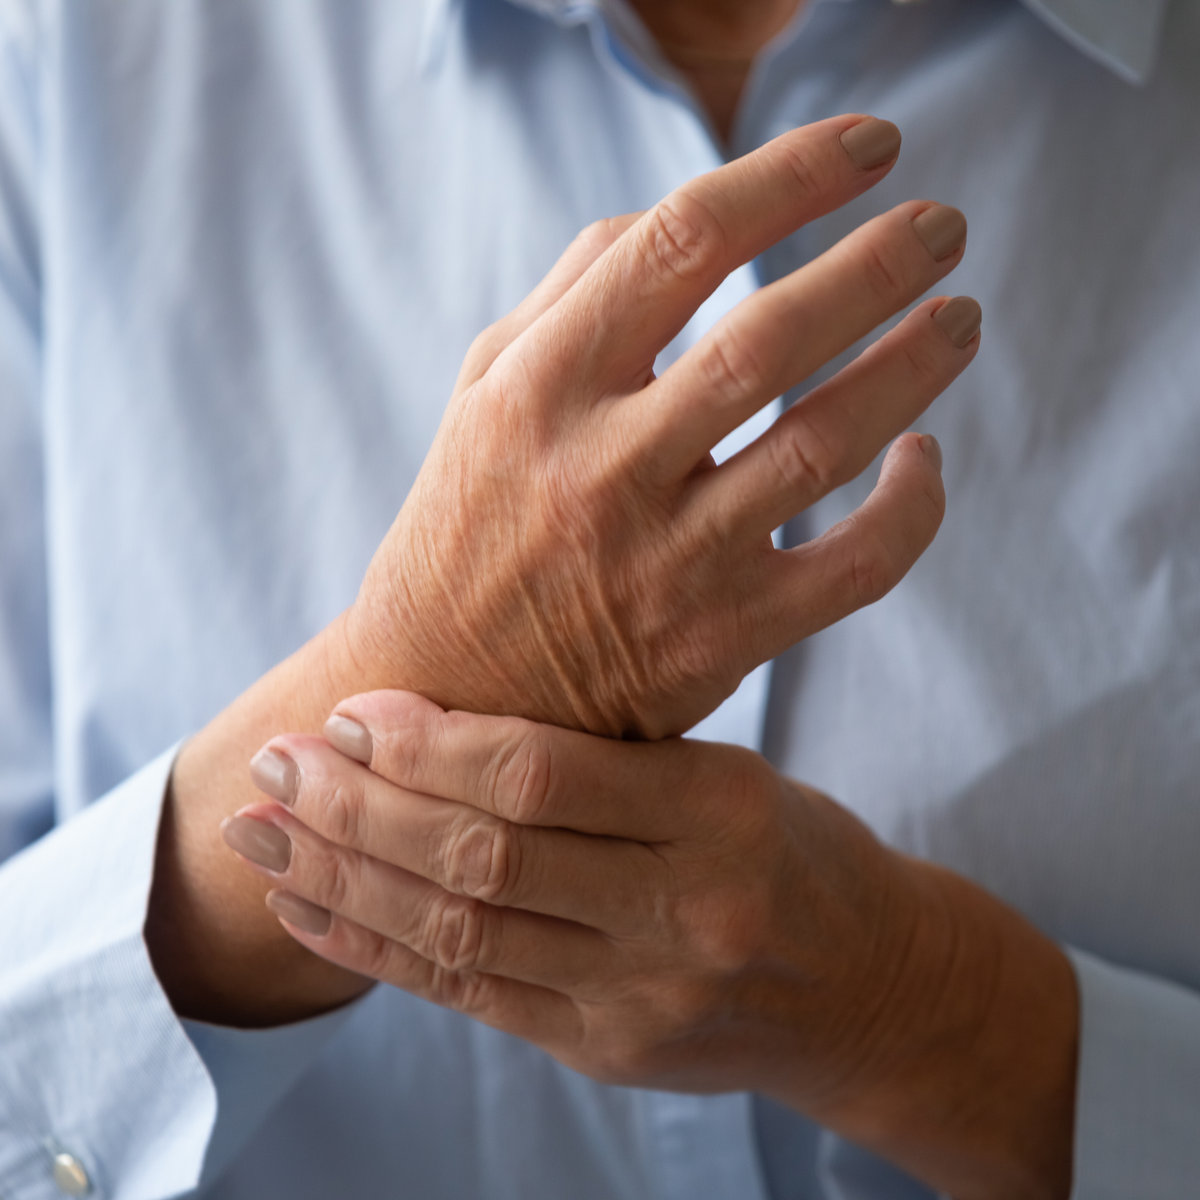 5 Reasons CBD May Relieve Your Arthritis Pain